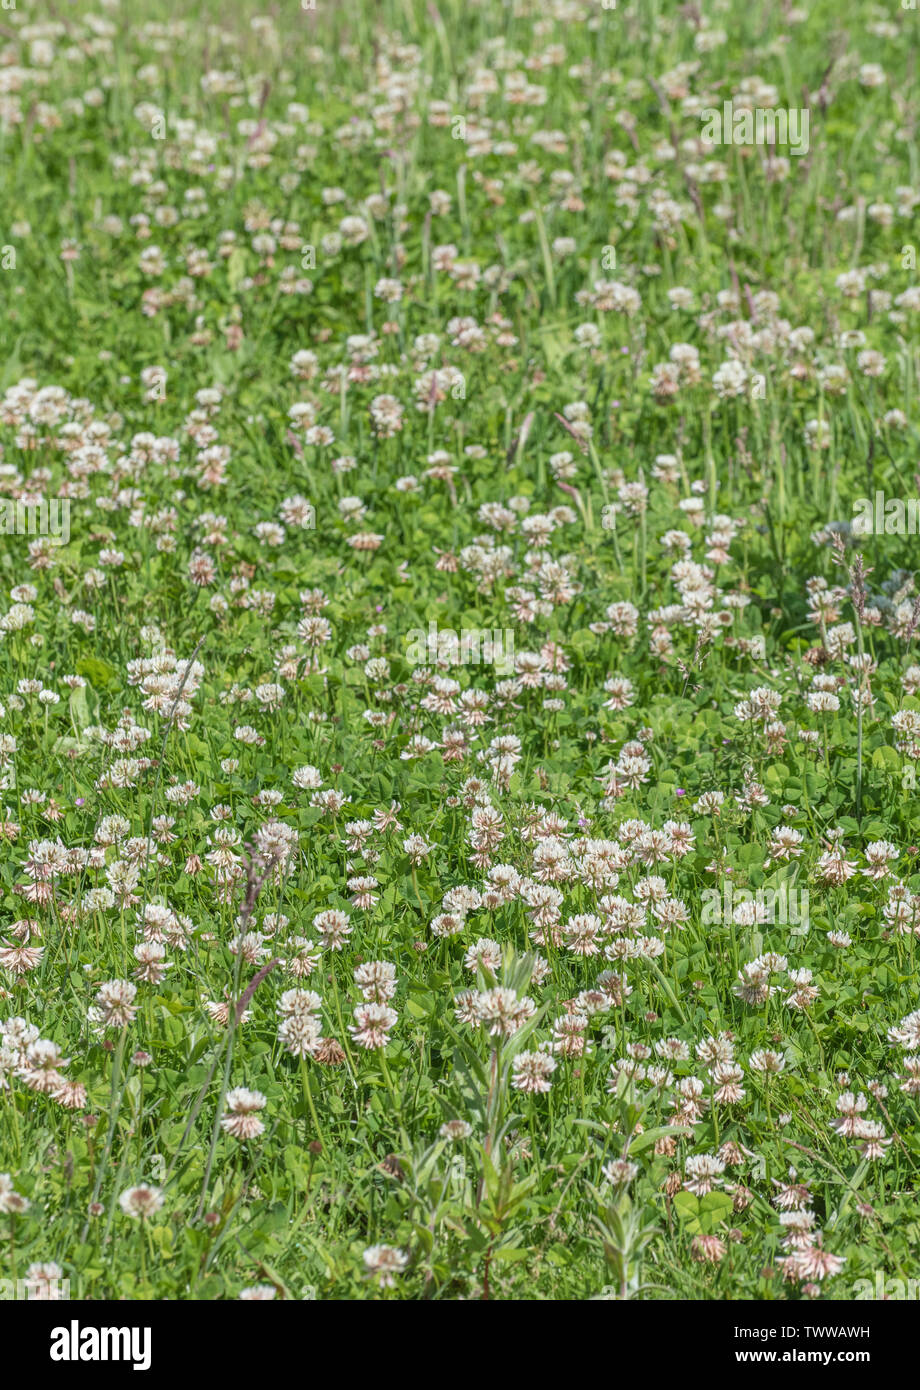 Patch of flowering White Clover / Trifolium repens among grass. There are many agricultural varieties of WC - unsure which this might be. Weed patch. Stock Photo